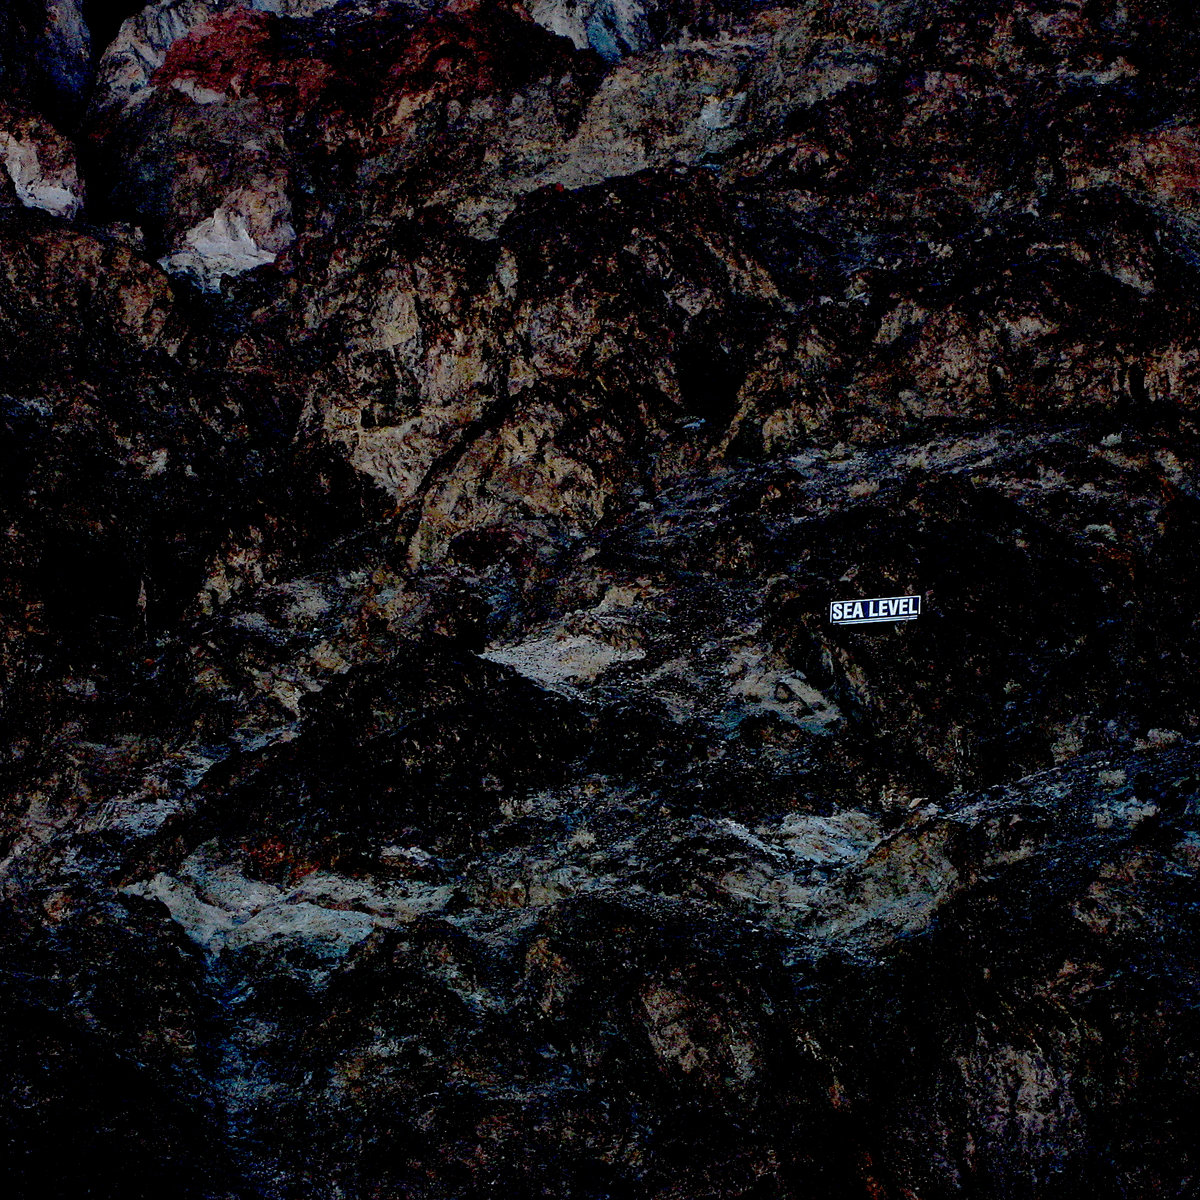 photo of rock face with small sign saying sea level, album cover for distant reader album